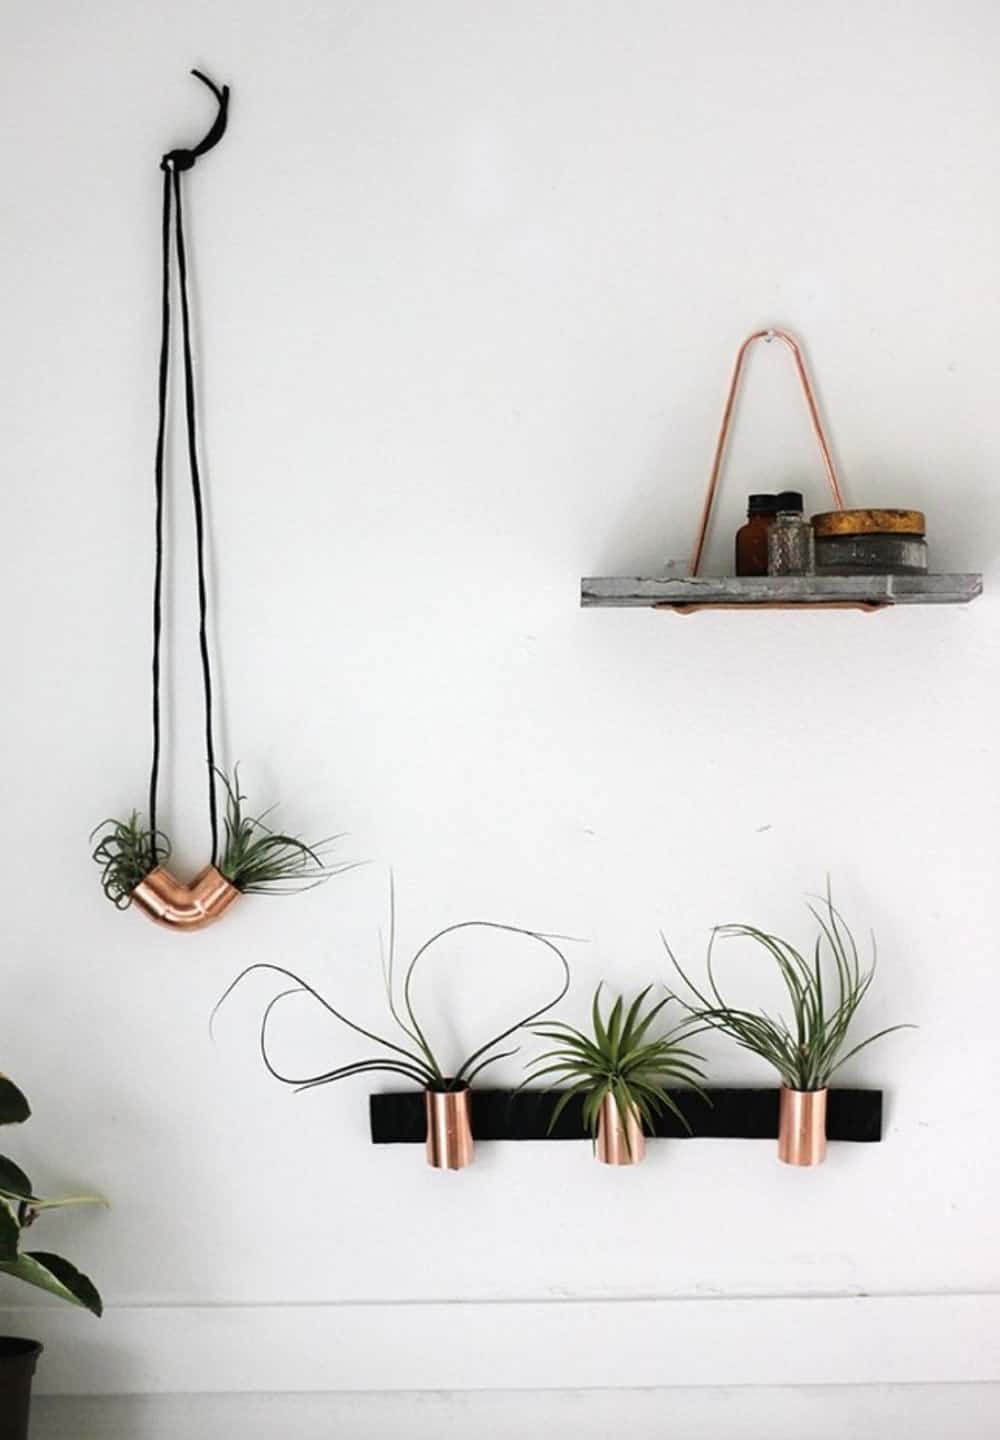 Copper airplant holders diy